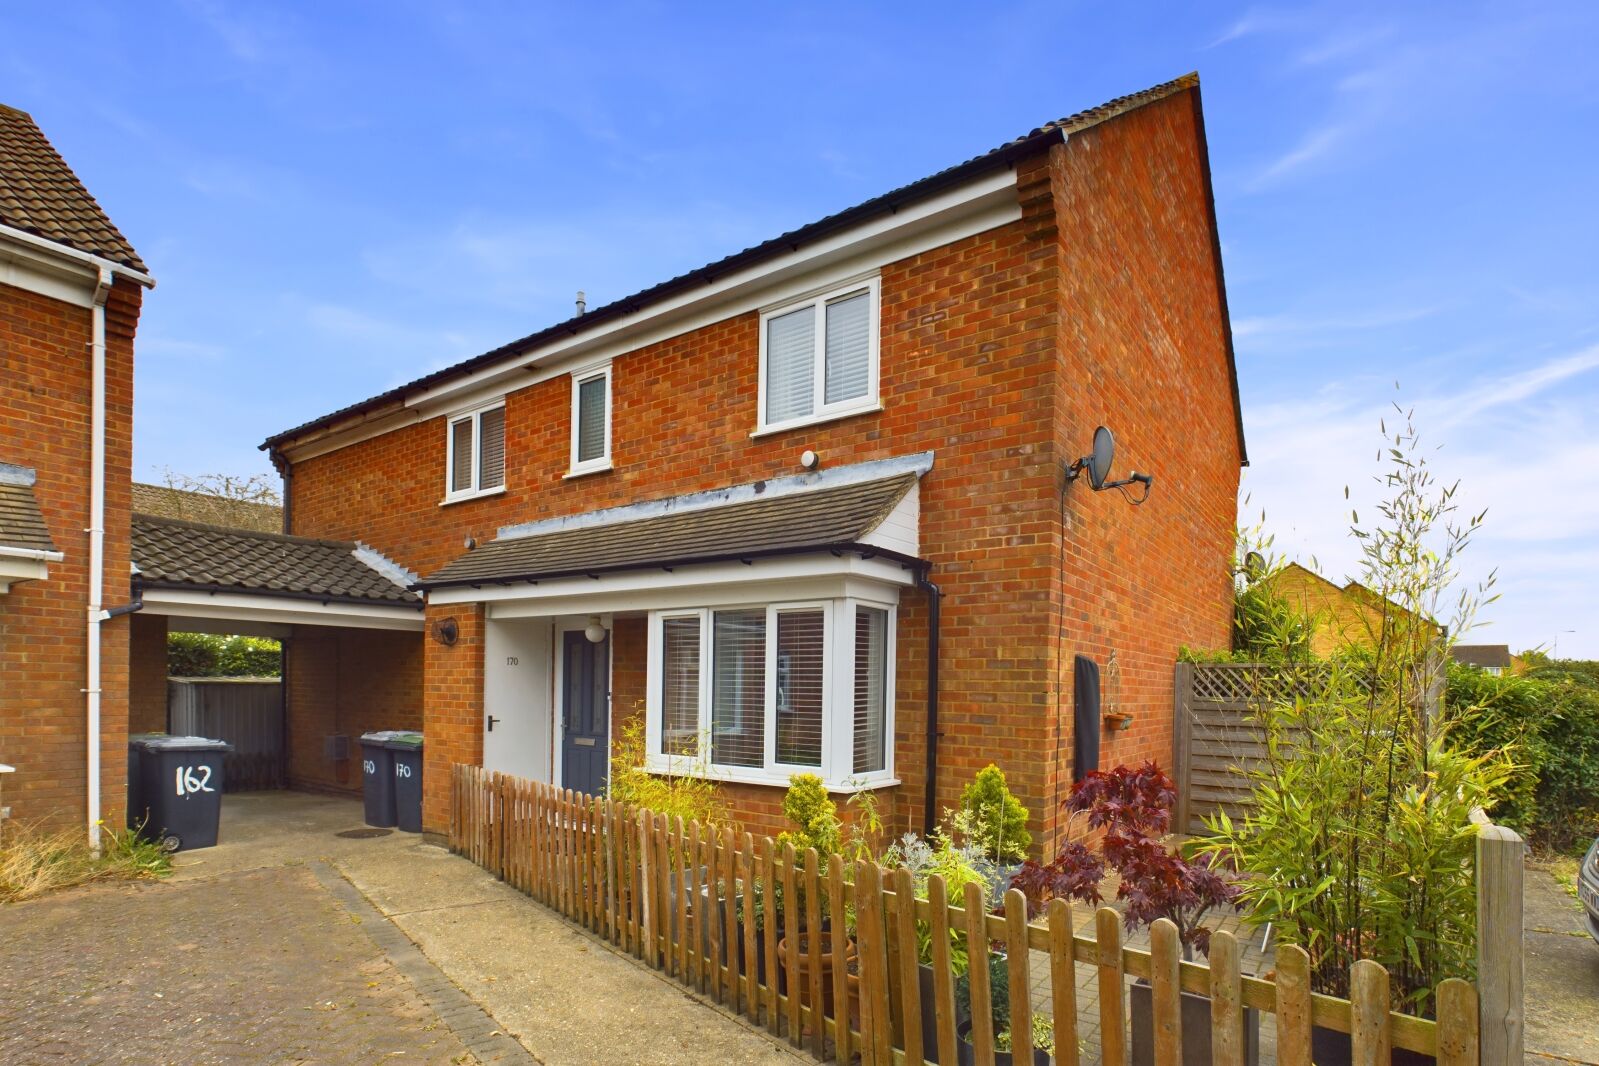 2 bedroom semi detached house for sale Lincoln Crescent, Biggleswade, SG18, main image